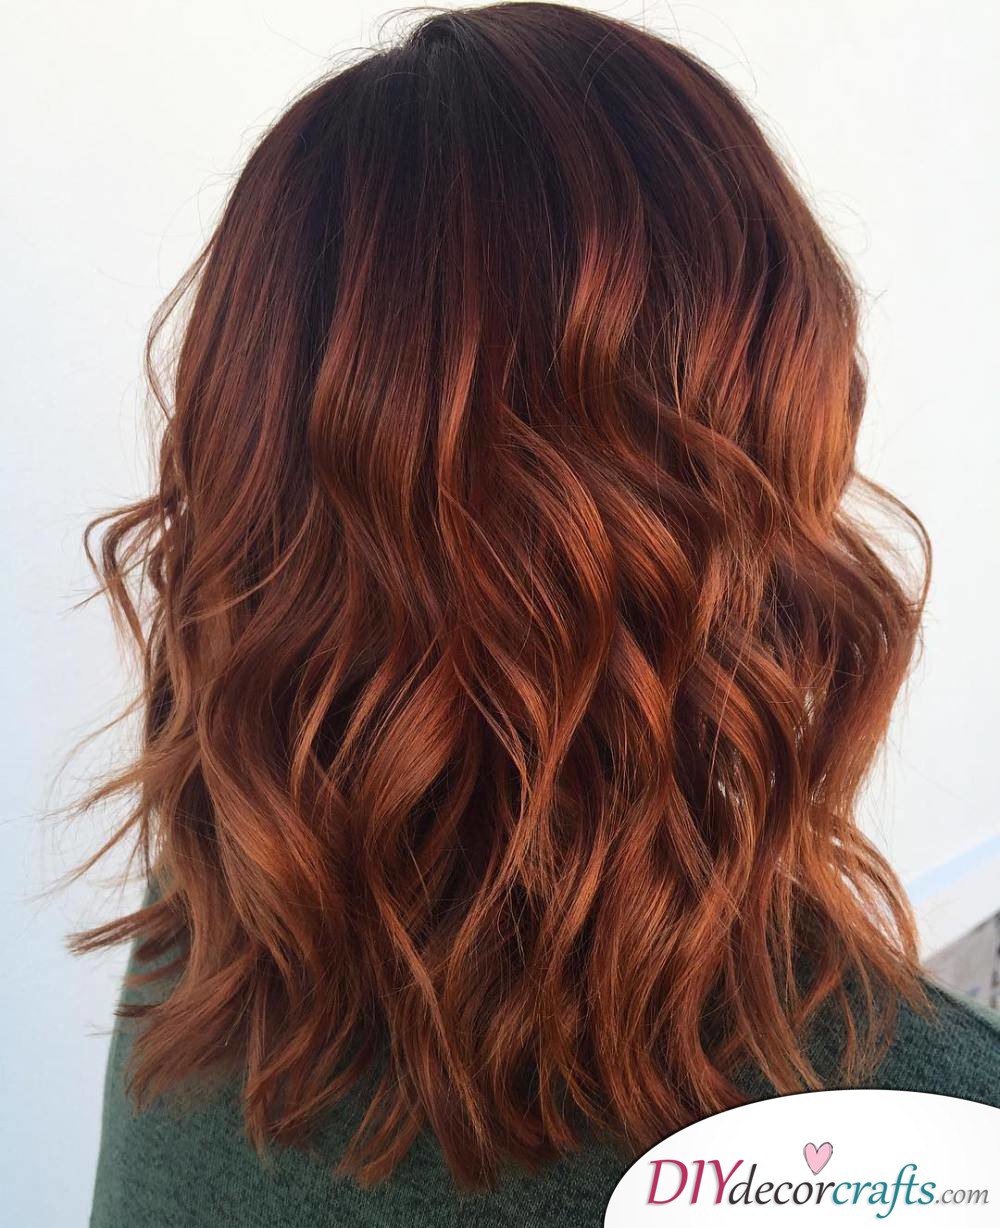 12 Fall Hair Color Ideas To Spice Things Up, Sensual Copper Hues